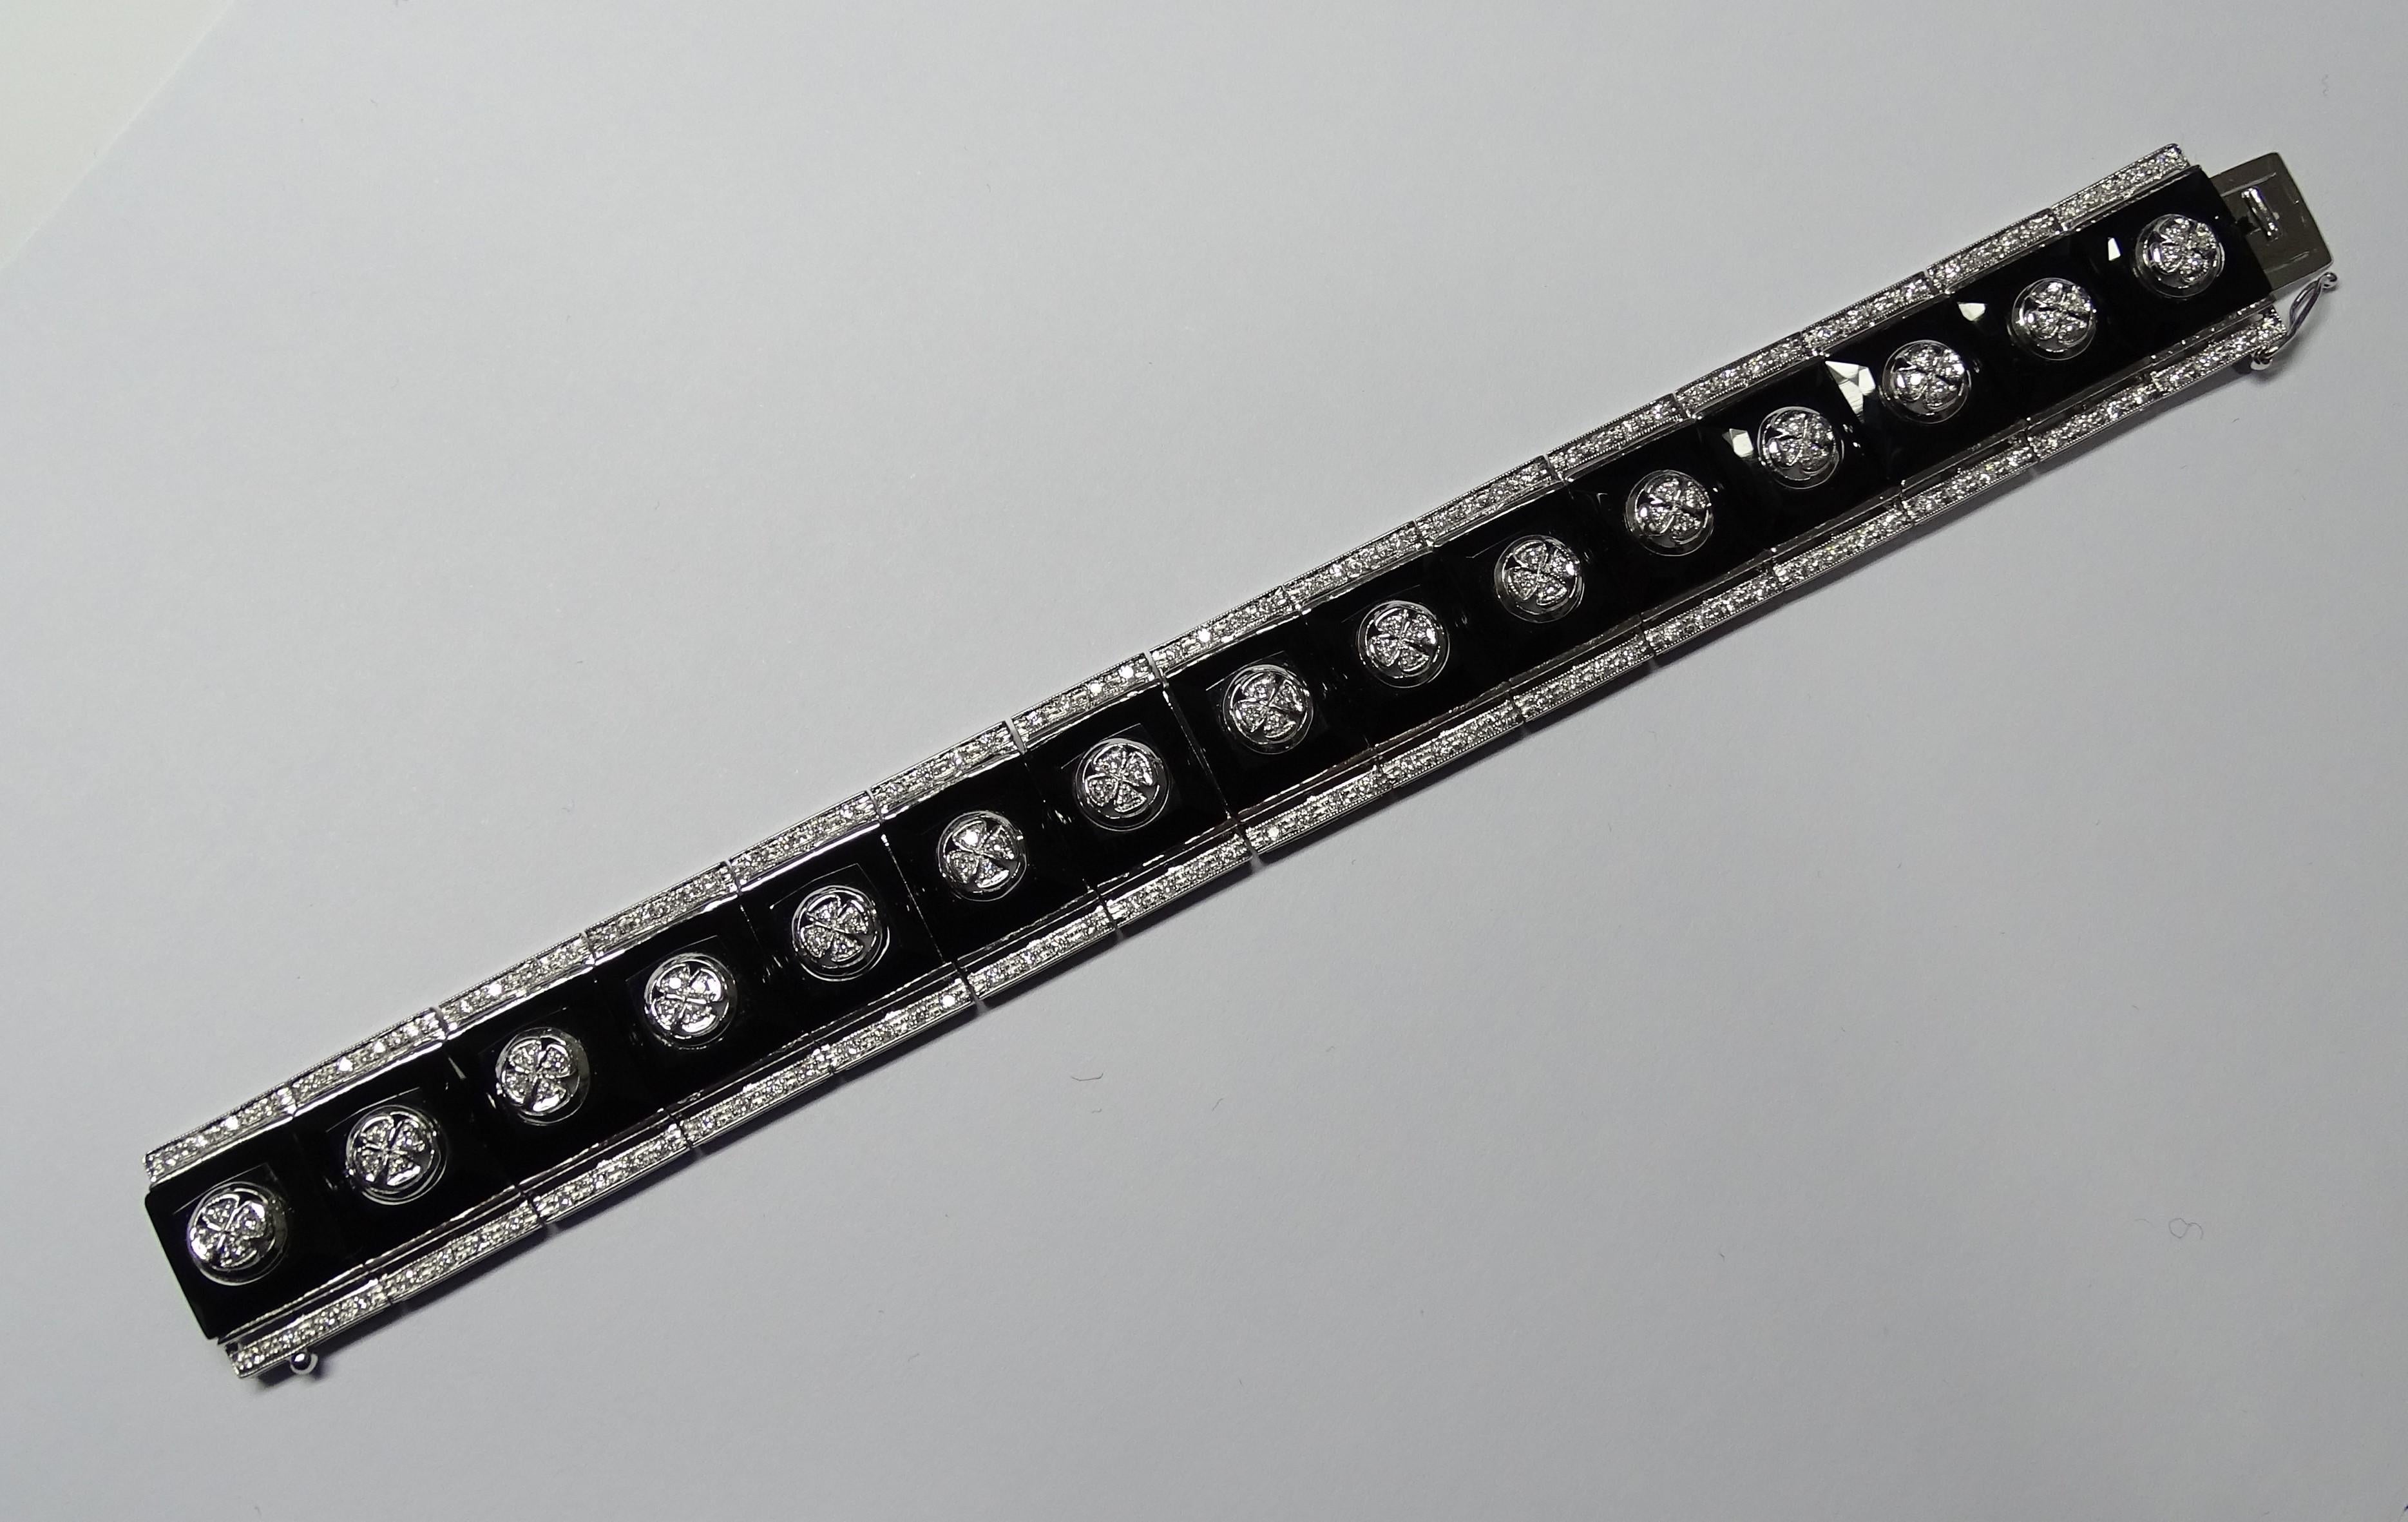 The Bracelet is made of 18K White Gold.
The Bracelet has 1.80 Carat of White Diamonds Modern Round Cut.
The Bracelet has 15 faceted cut onyx.
This Bracelet is inspired by Art Deco.
We're a workshop so every piece is handmade, customizable and